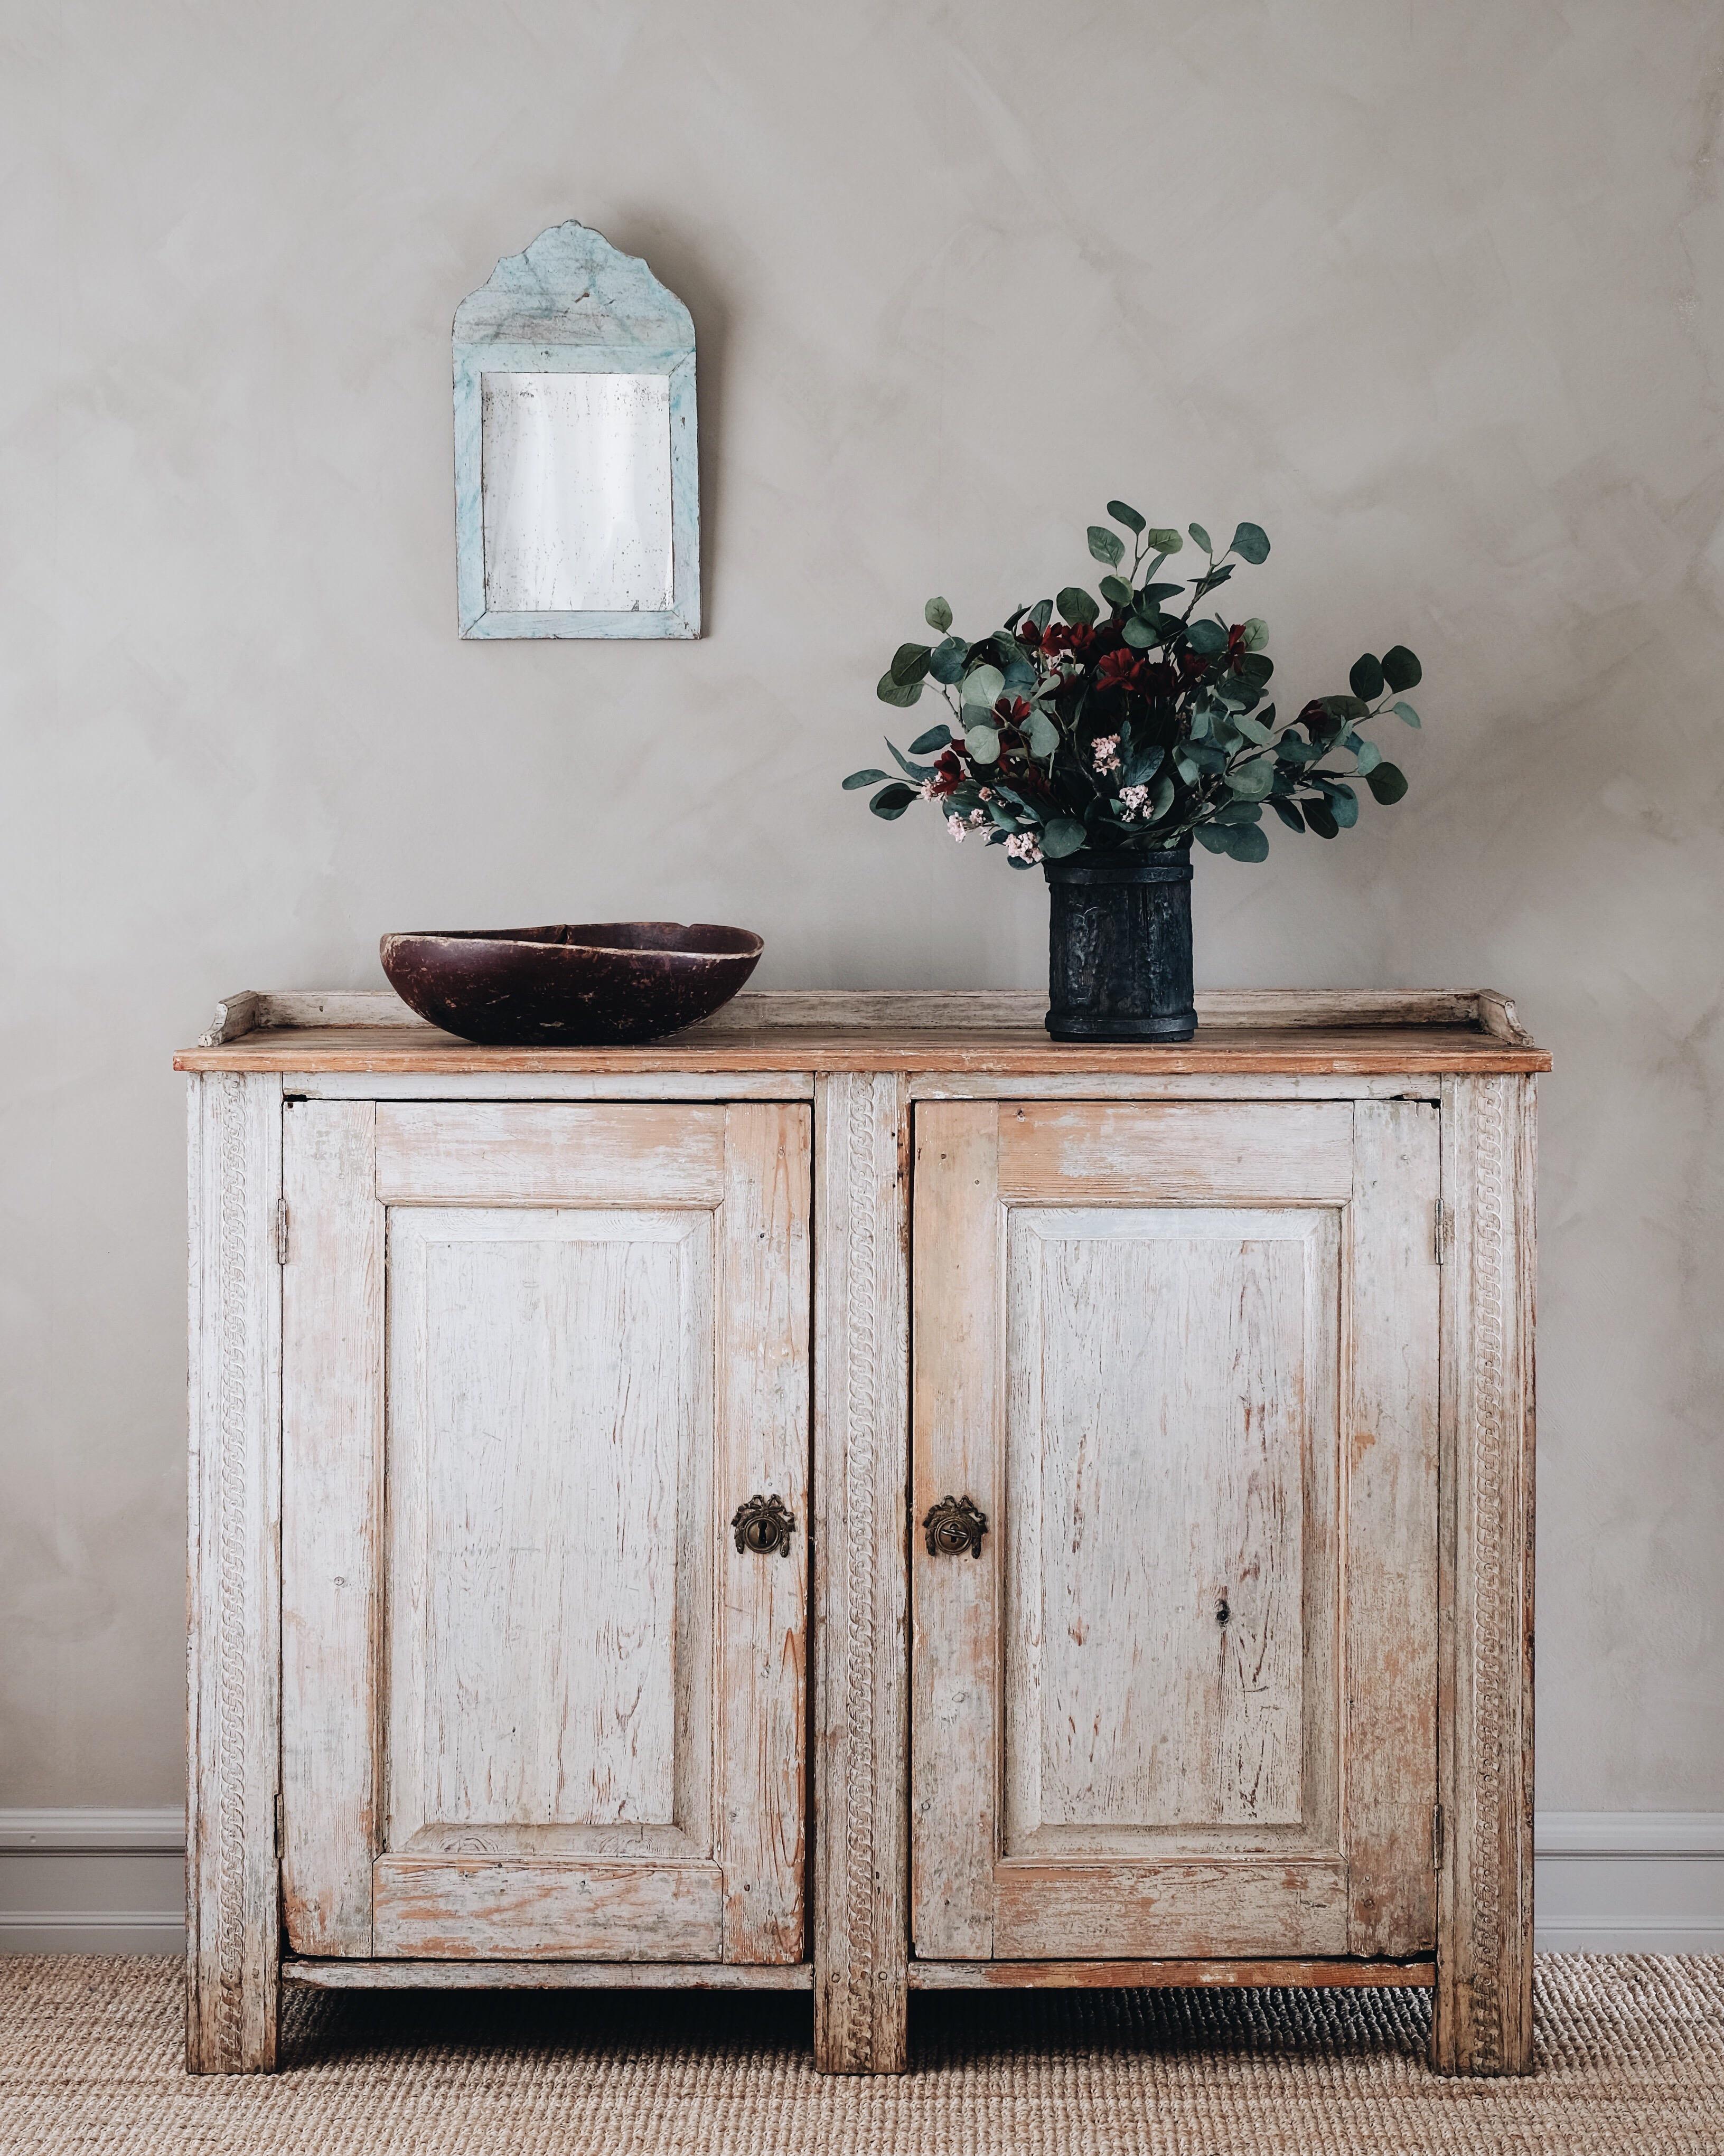 Elegant 18th century Gustavian period sideboard/buffet in its original finish with a great patinated surface. Good proportions with two doors and two interior shelves, Sweden, circa 1790. 

Very good condition with wear consistent with age and